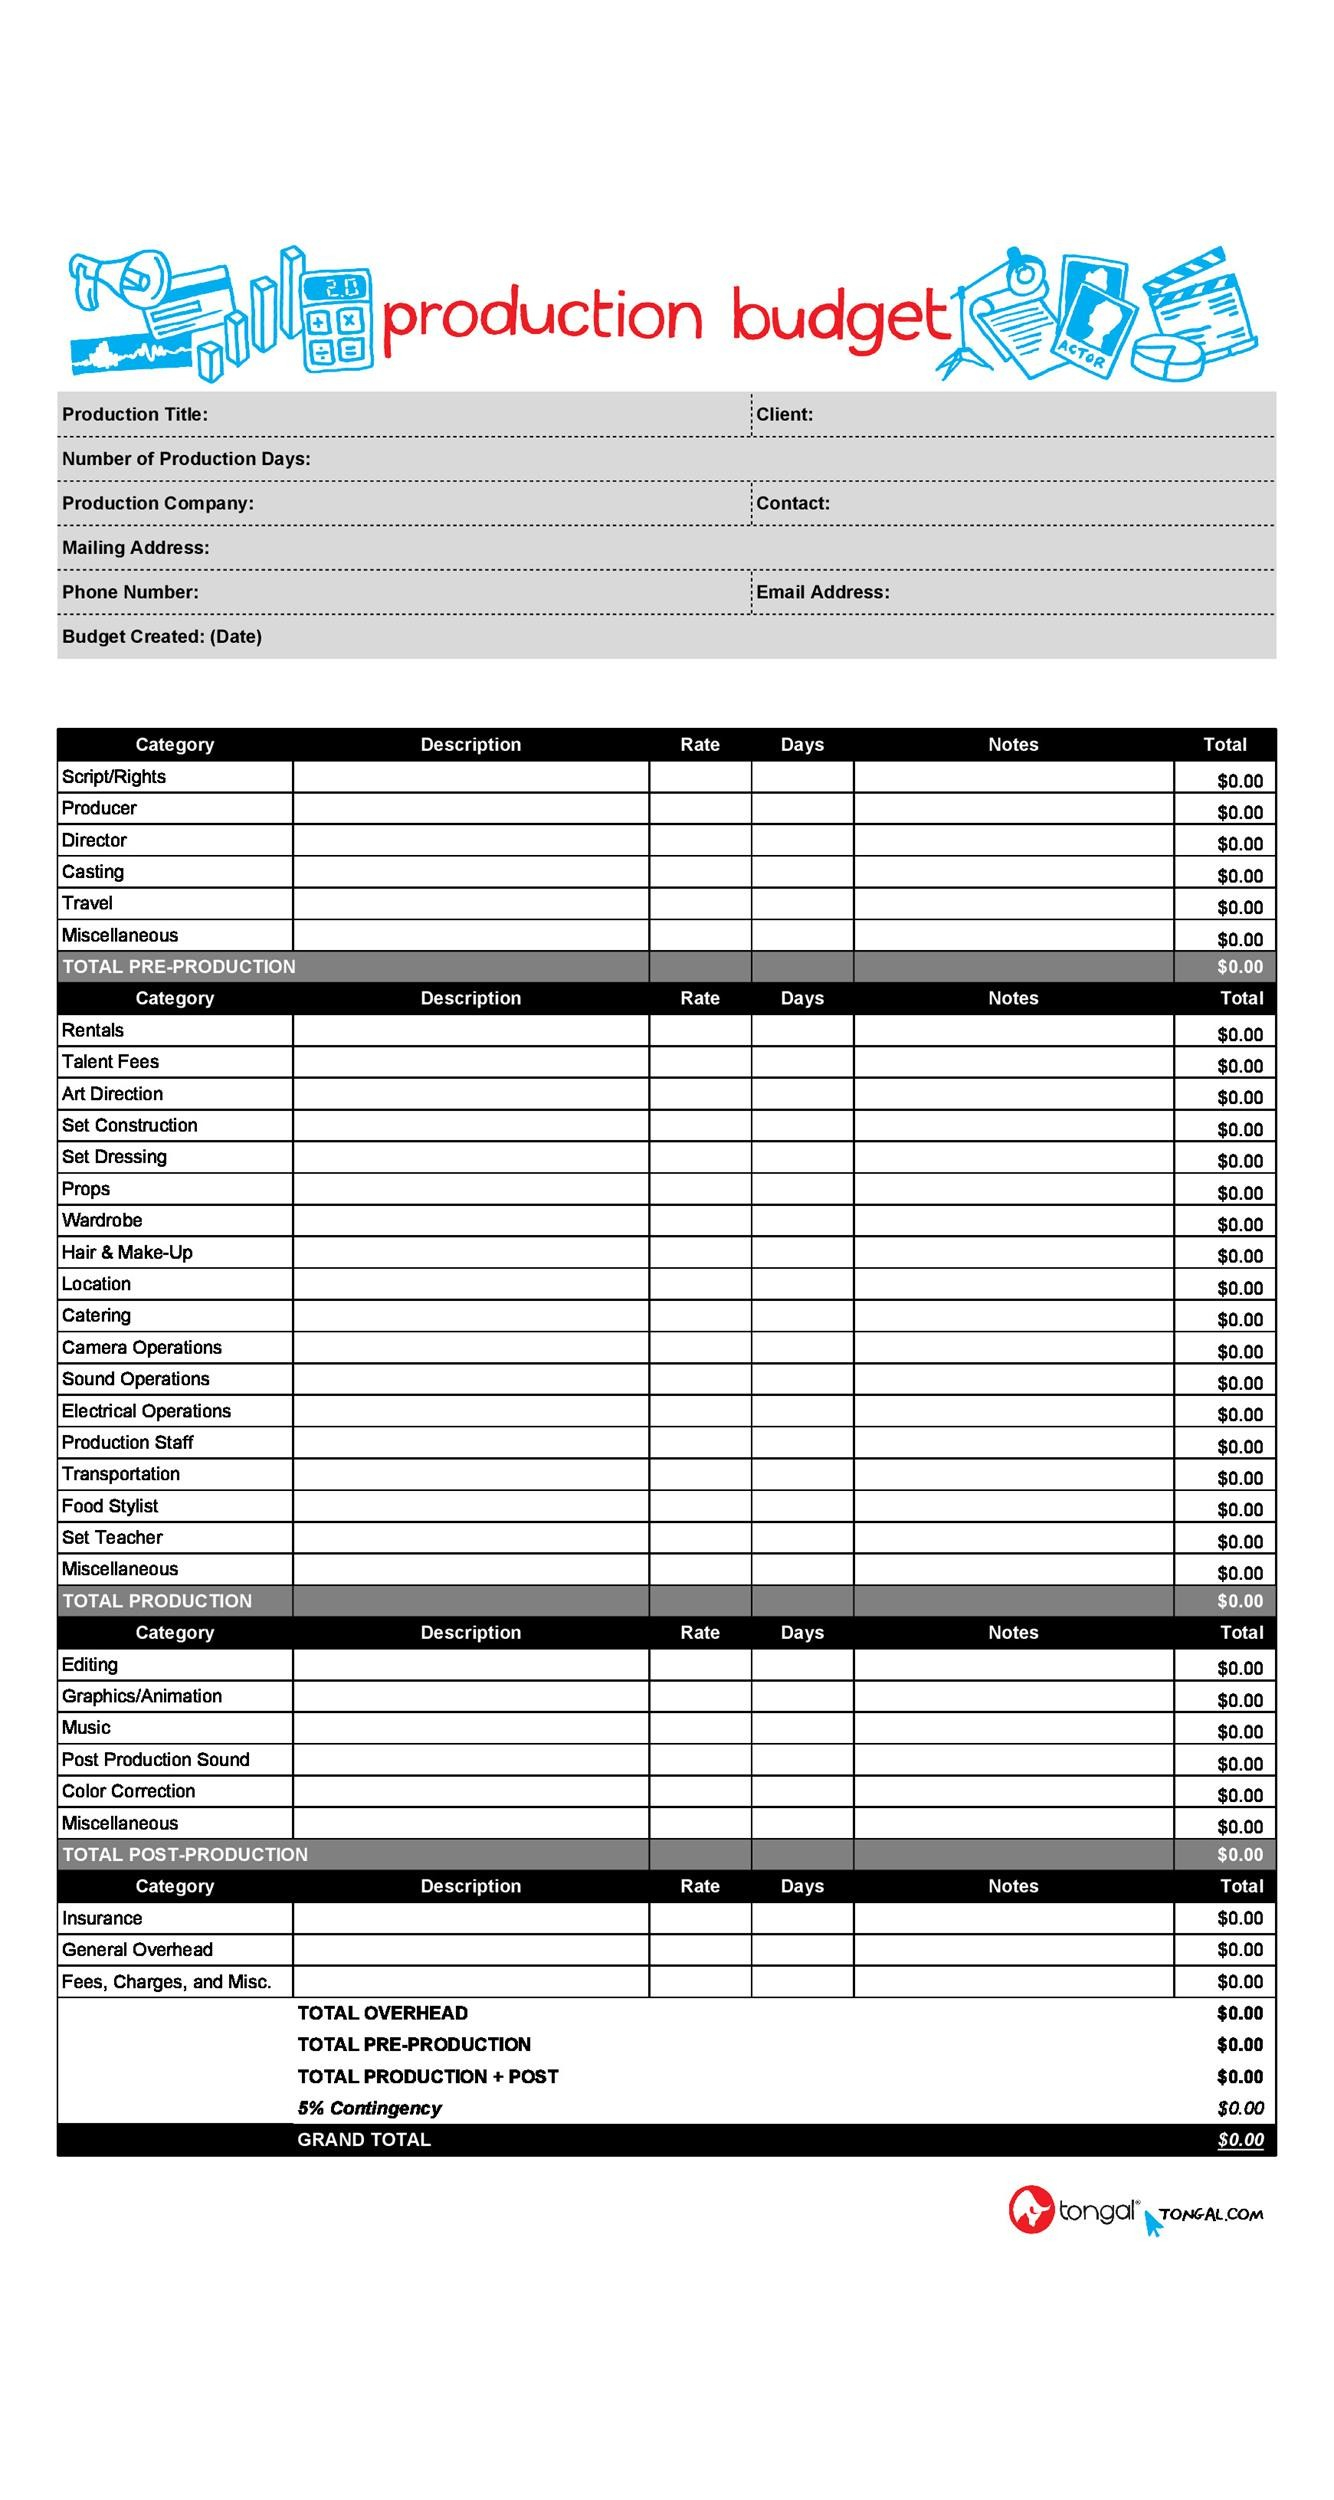 11 Free Film Budget Templates (Excel, Word) ᐅ TemplateLab Intended For Independent Film Budget Template Throughout Independent Film Budget Template